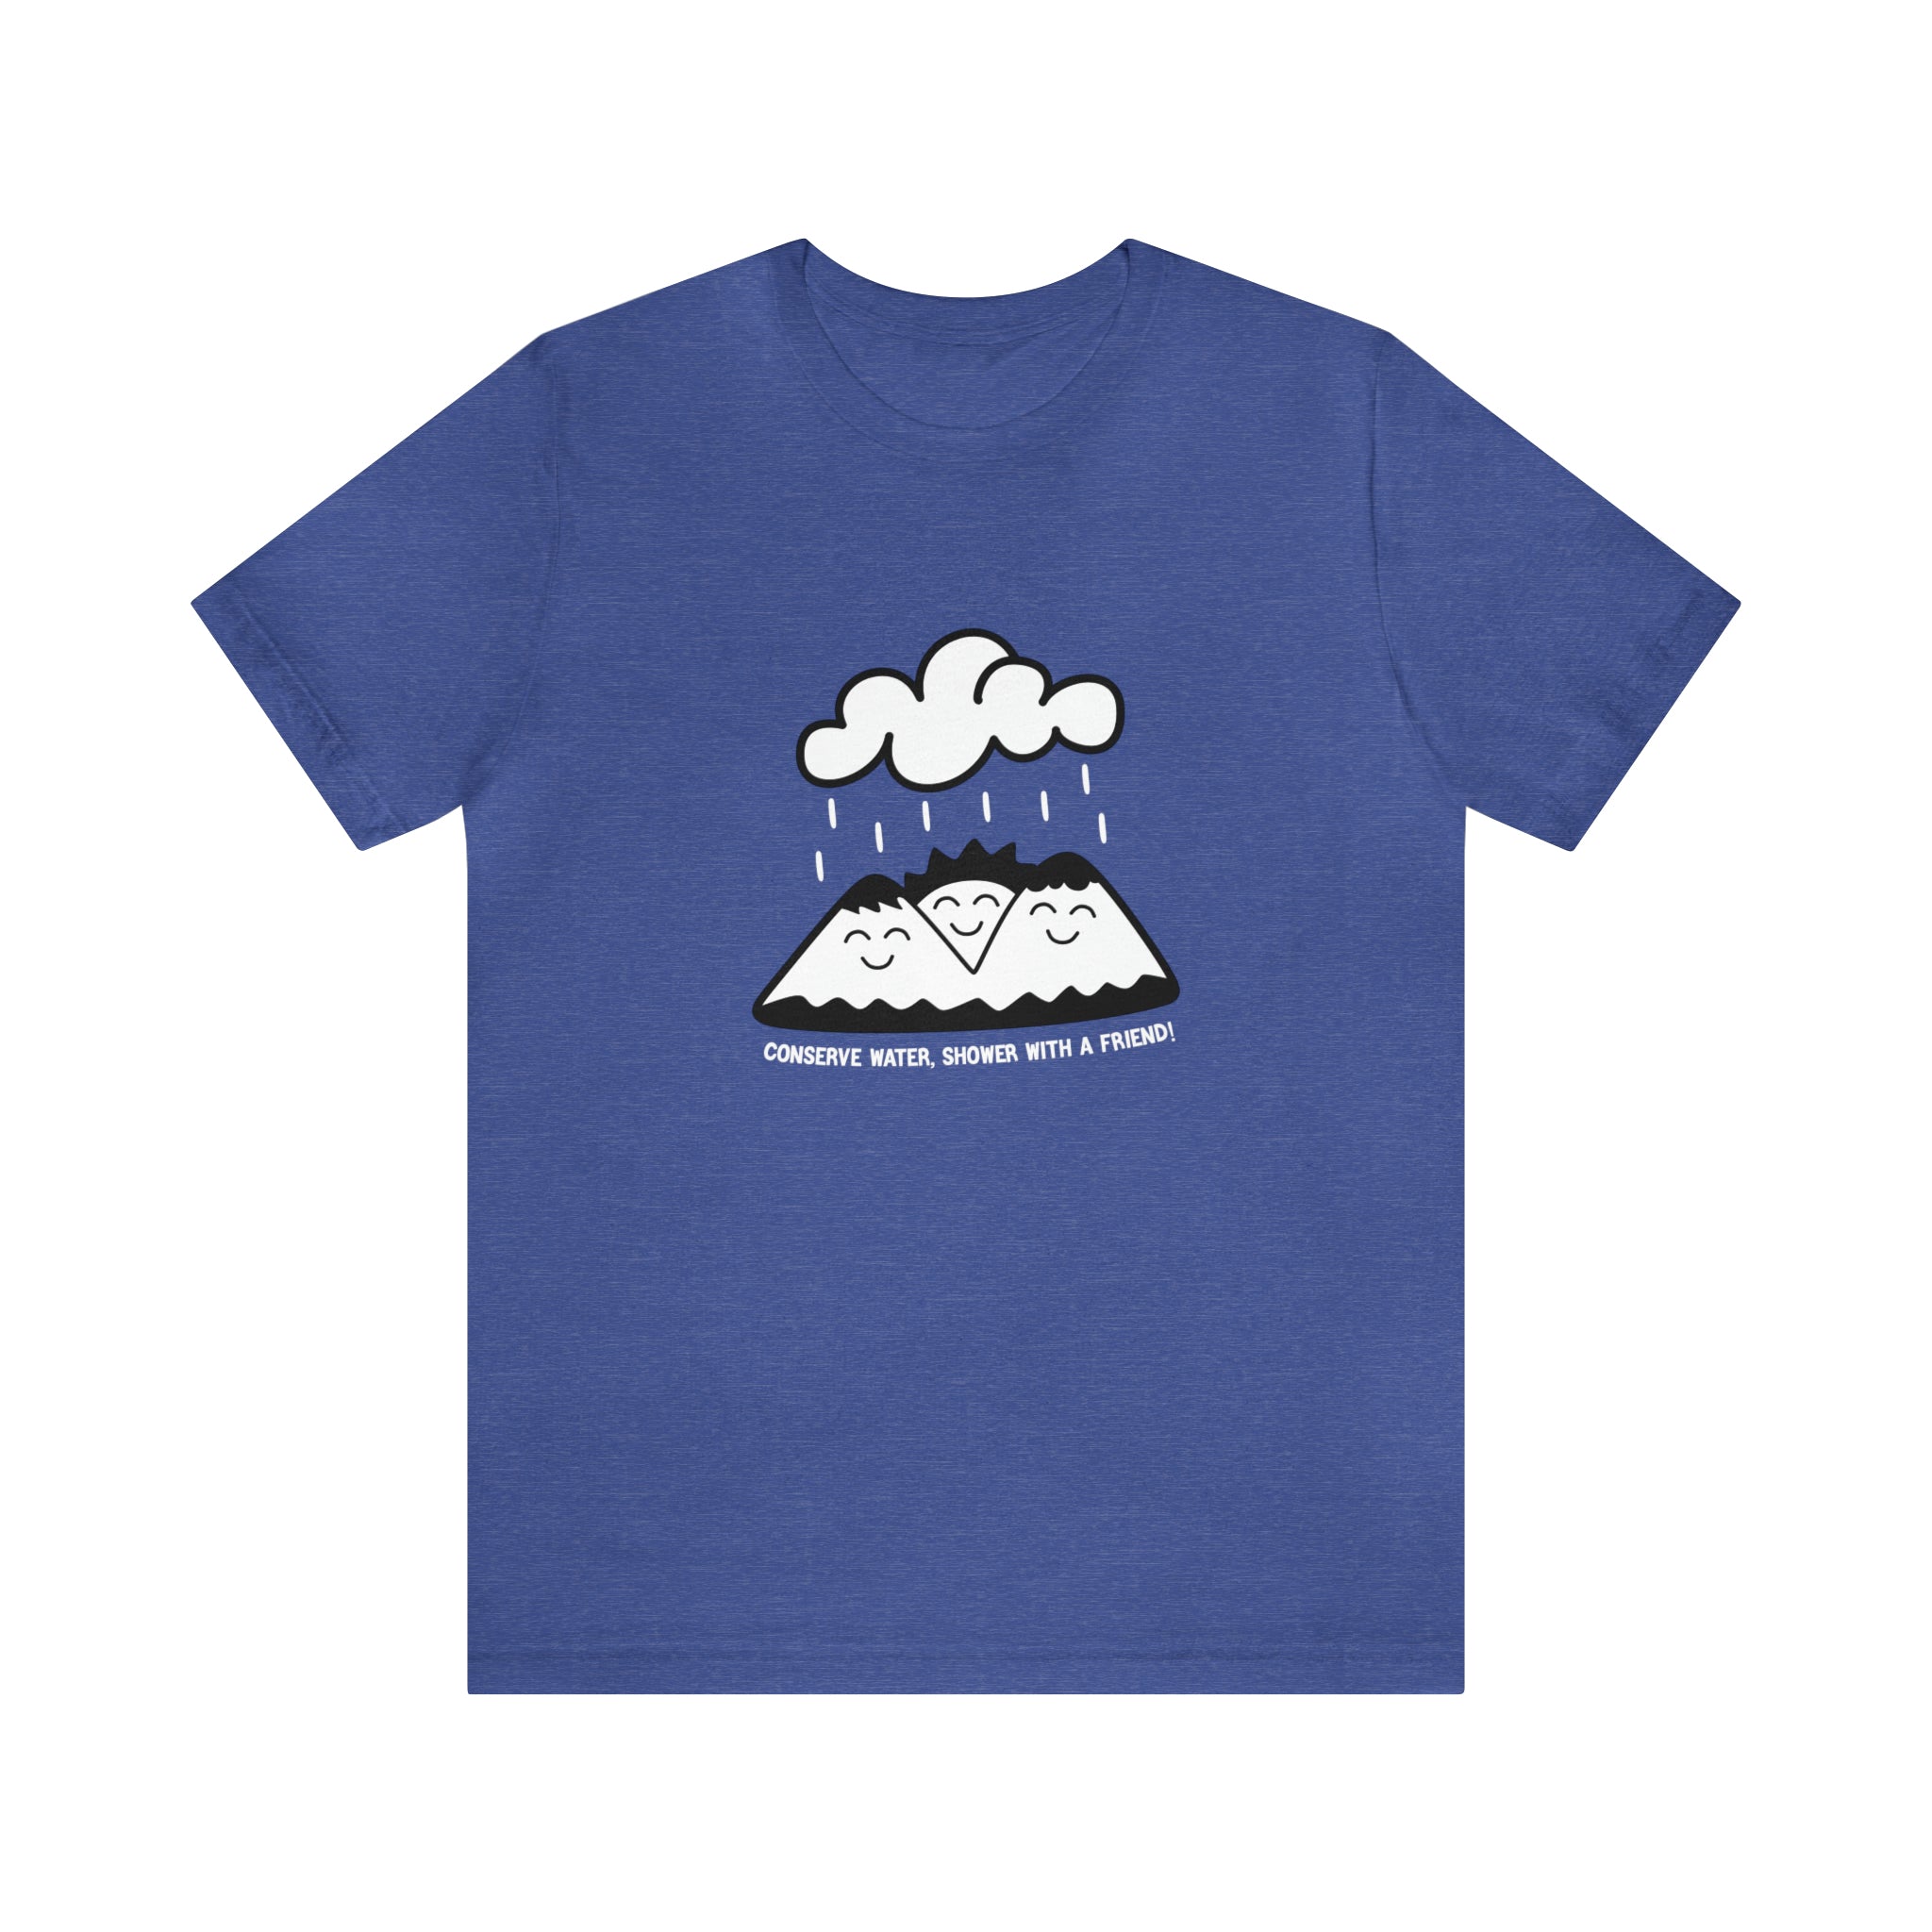 An eco-friendly Conserve Water Shower with a Friend T-shirt with an image of a mountain and clouds.